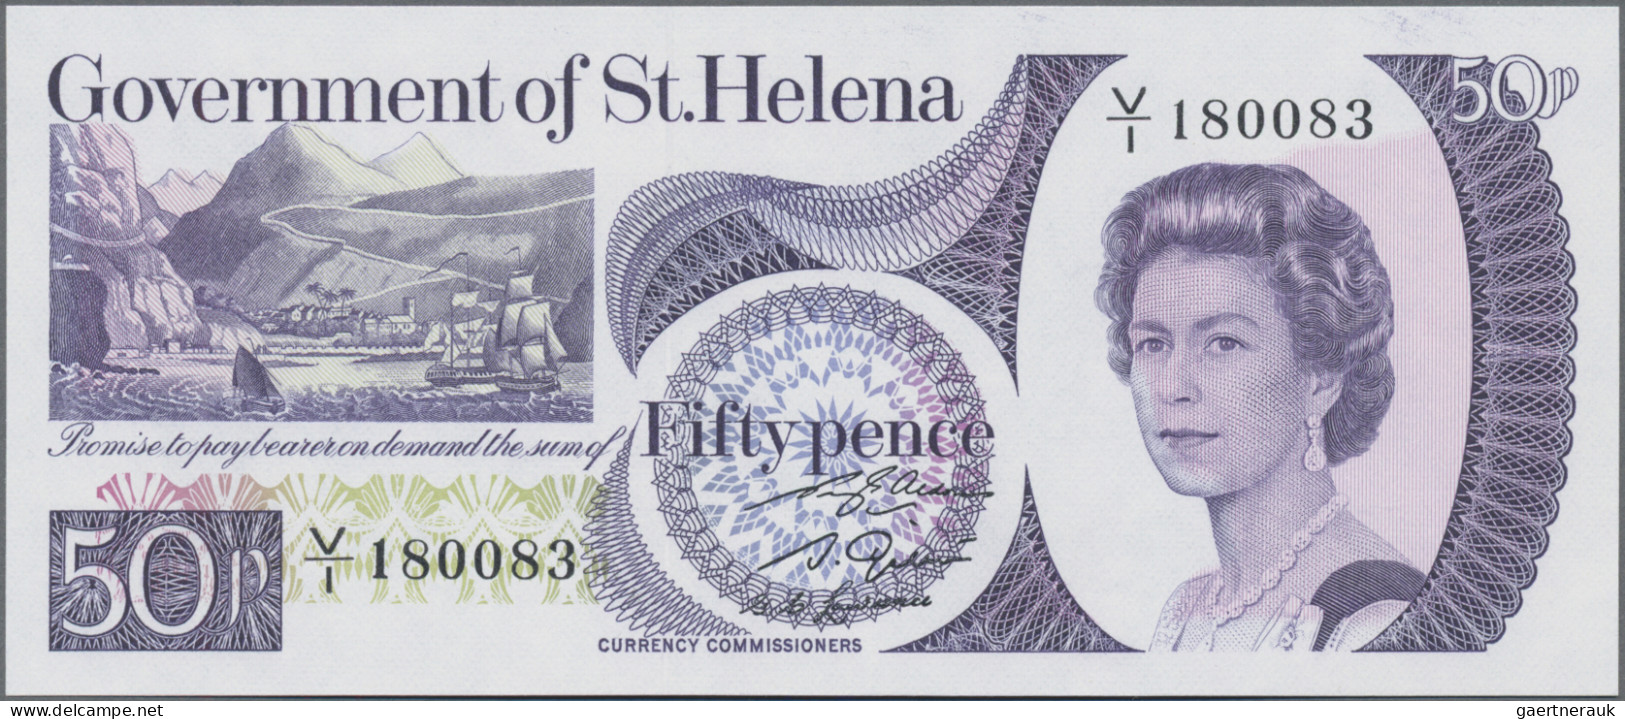 St. Helena: Government of Saint Helena, lot with 4 banknotes, series 1979-1988,